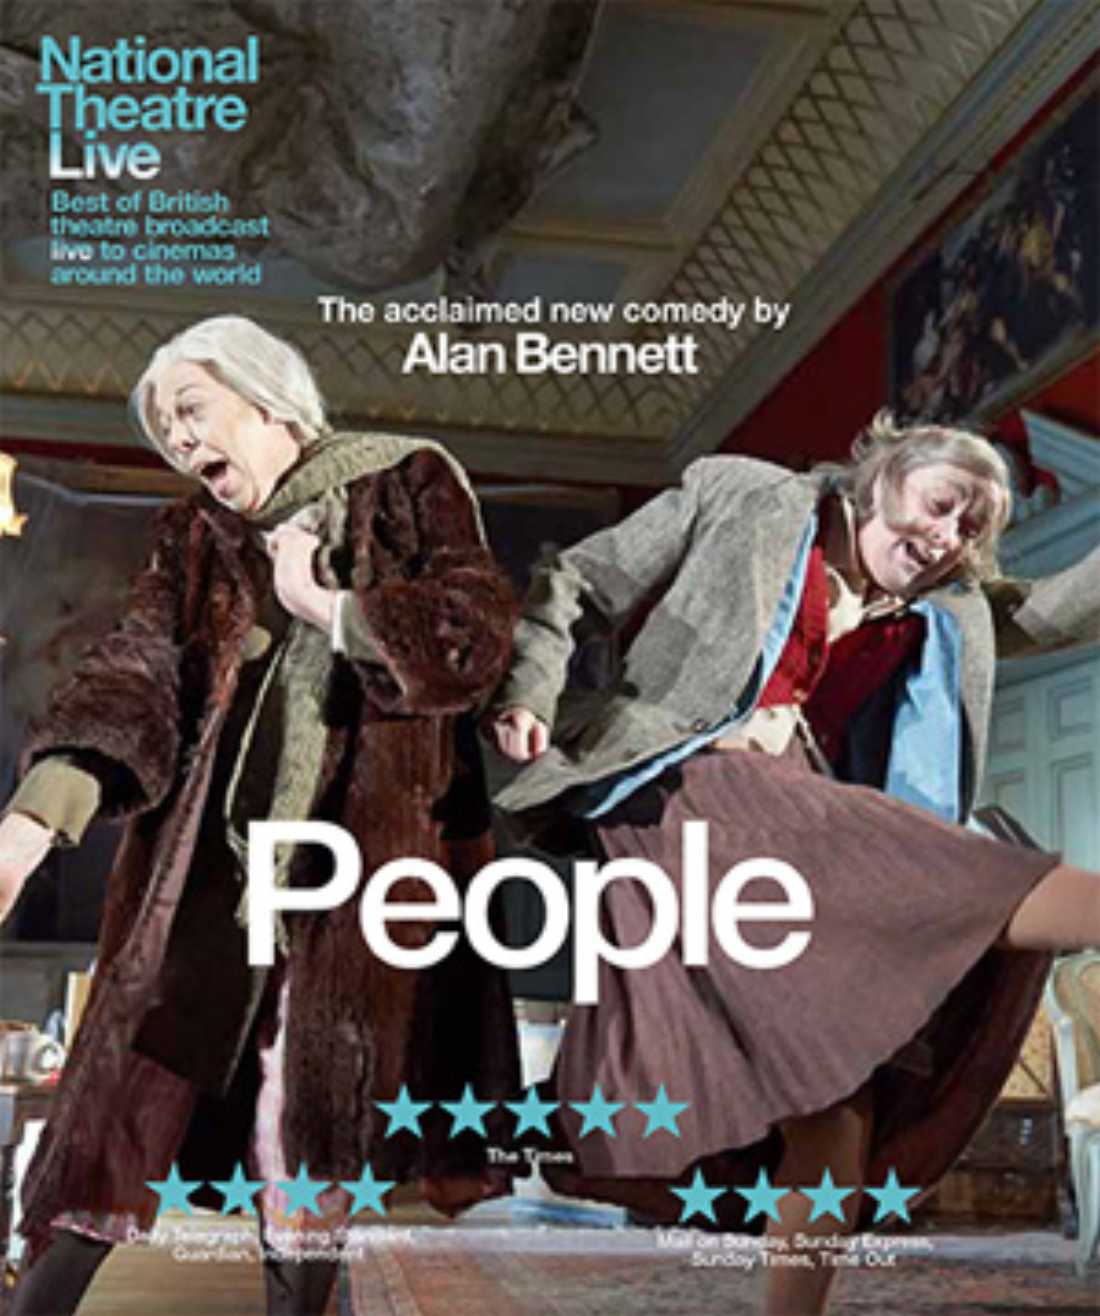 British comedy, "People" will be broadcast at 2pm and 7pm at the Modern Art Museum of Fort Worth.